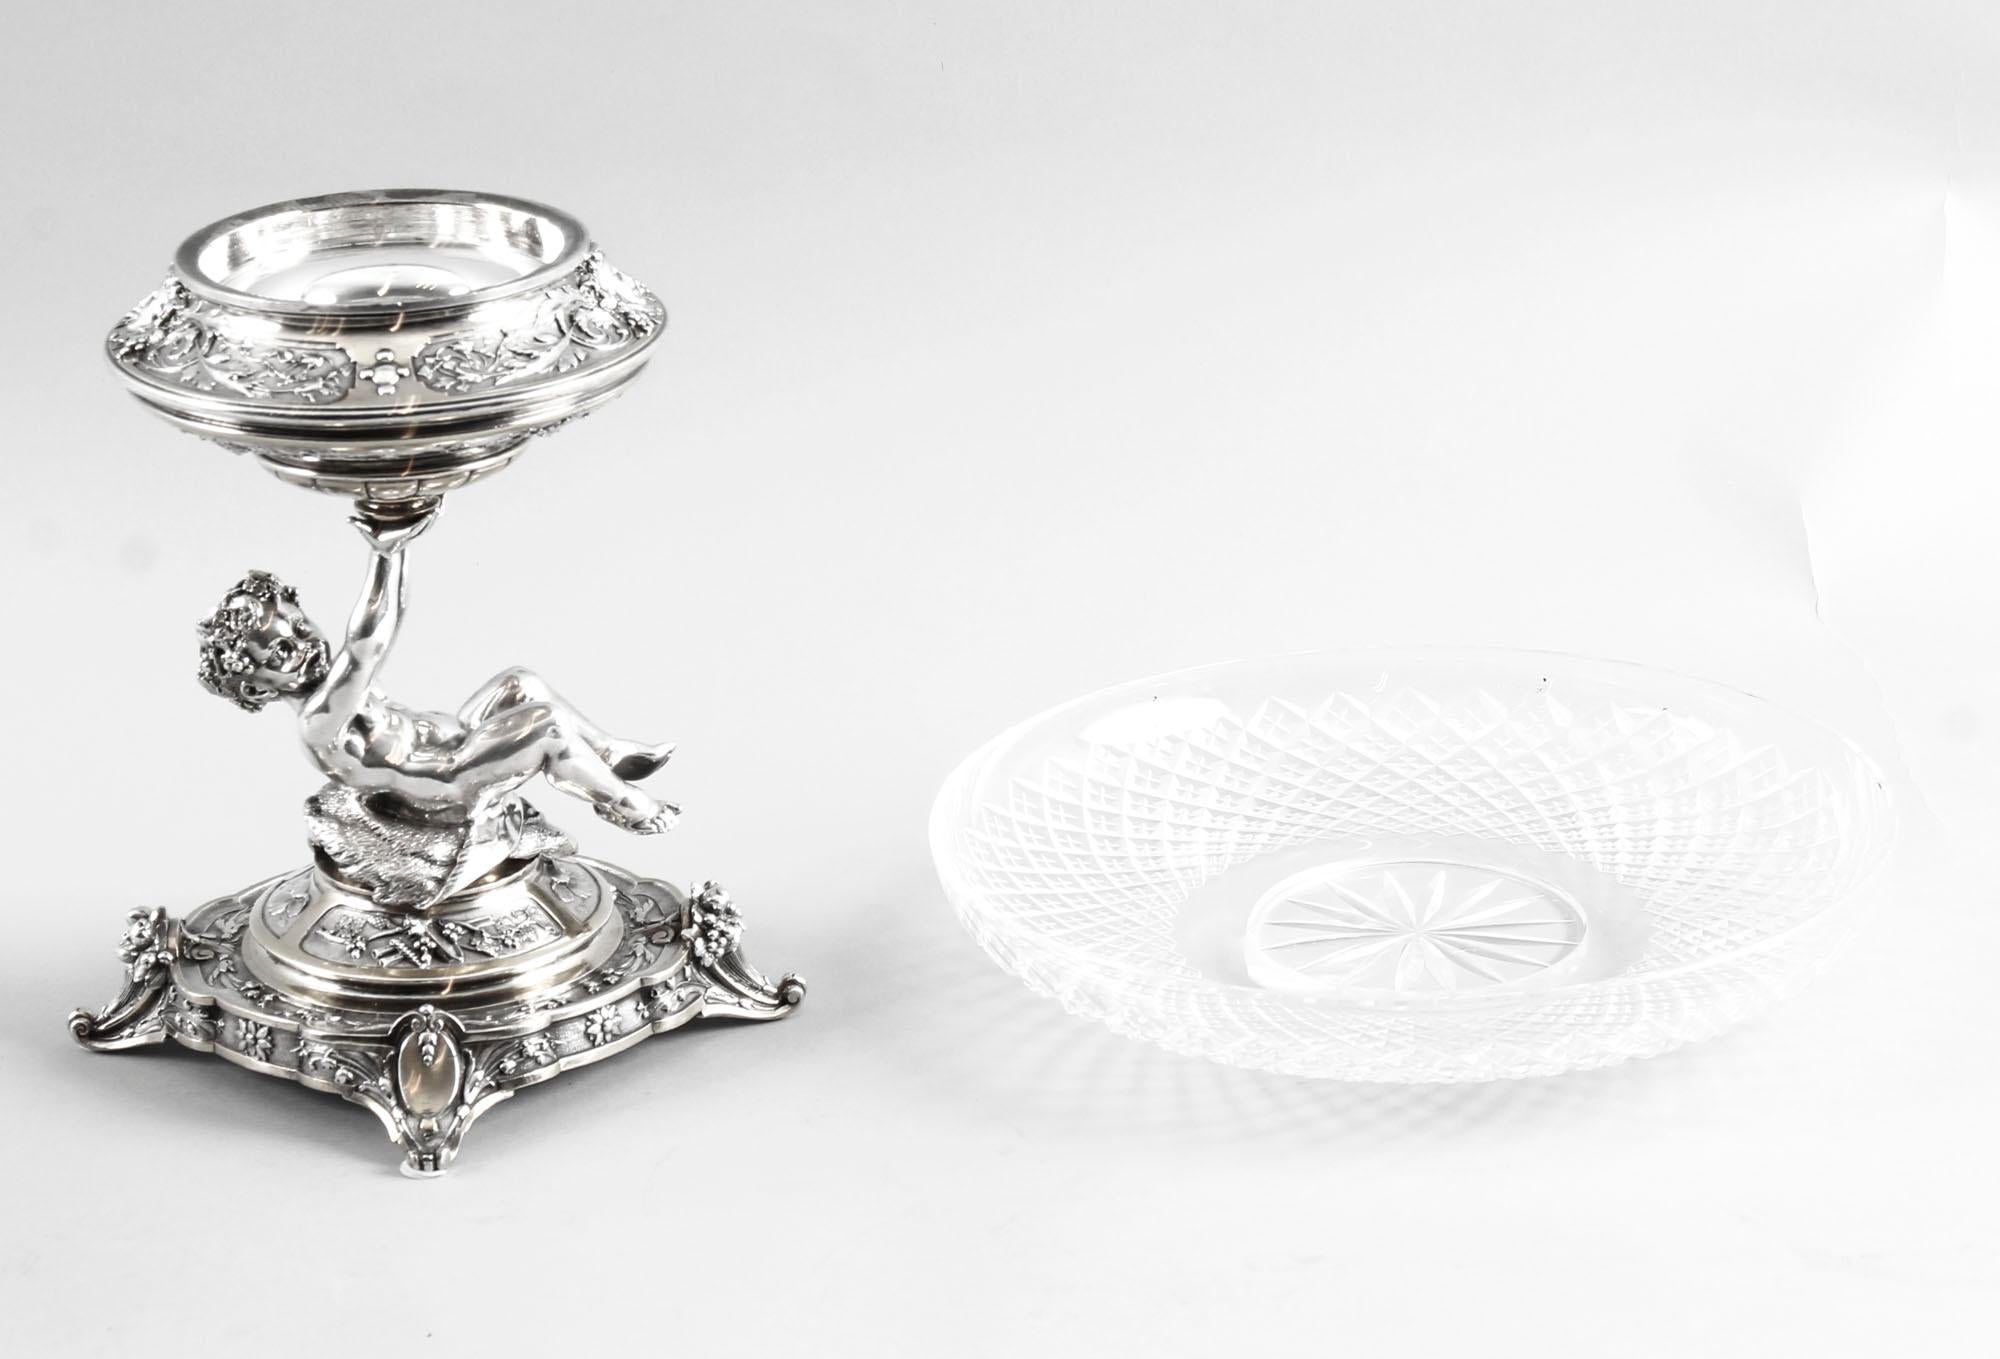 English Victorian Silver Plate & Cut Glass Centrepieces 1883, 19th Century, Pair 1